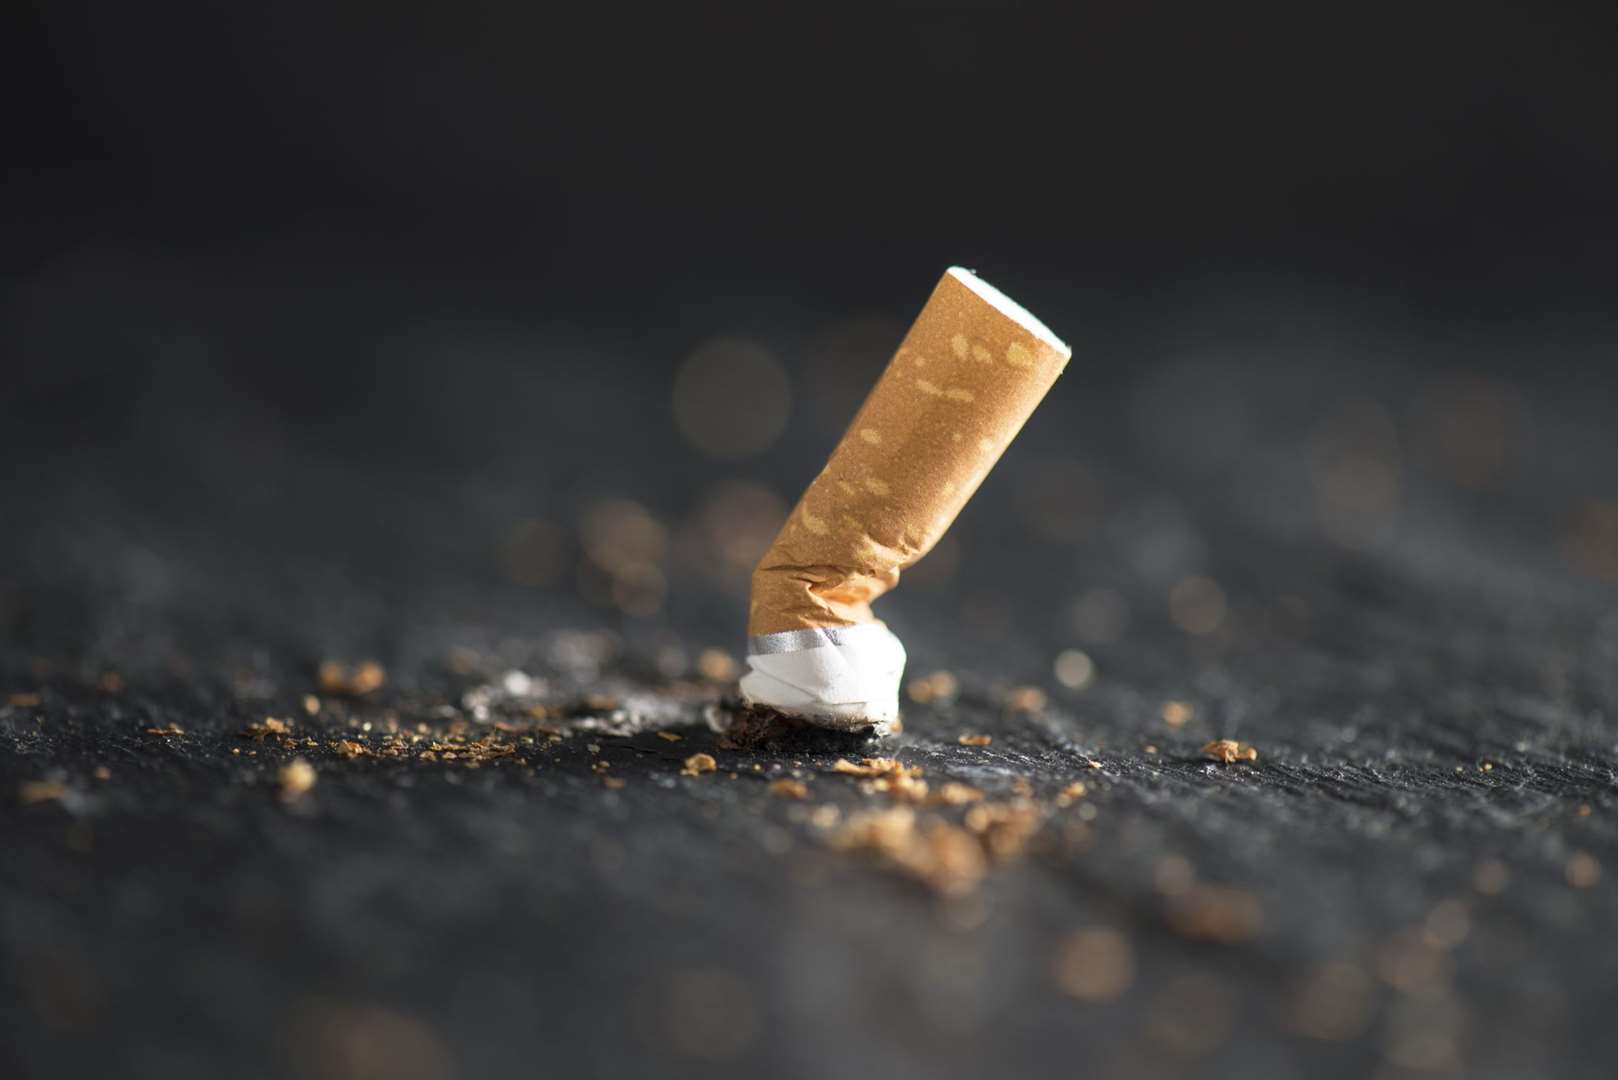 Smoking damages the lungs, weakens the immune system and causes a range of severe respiratory problems